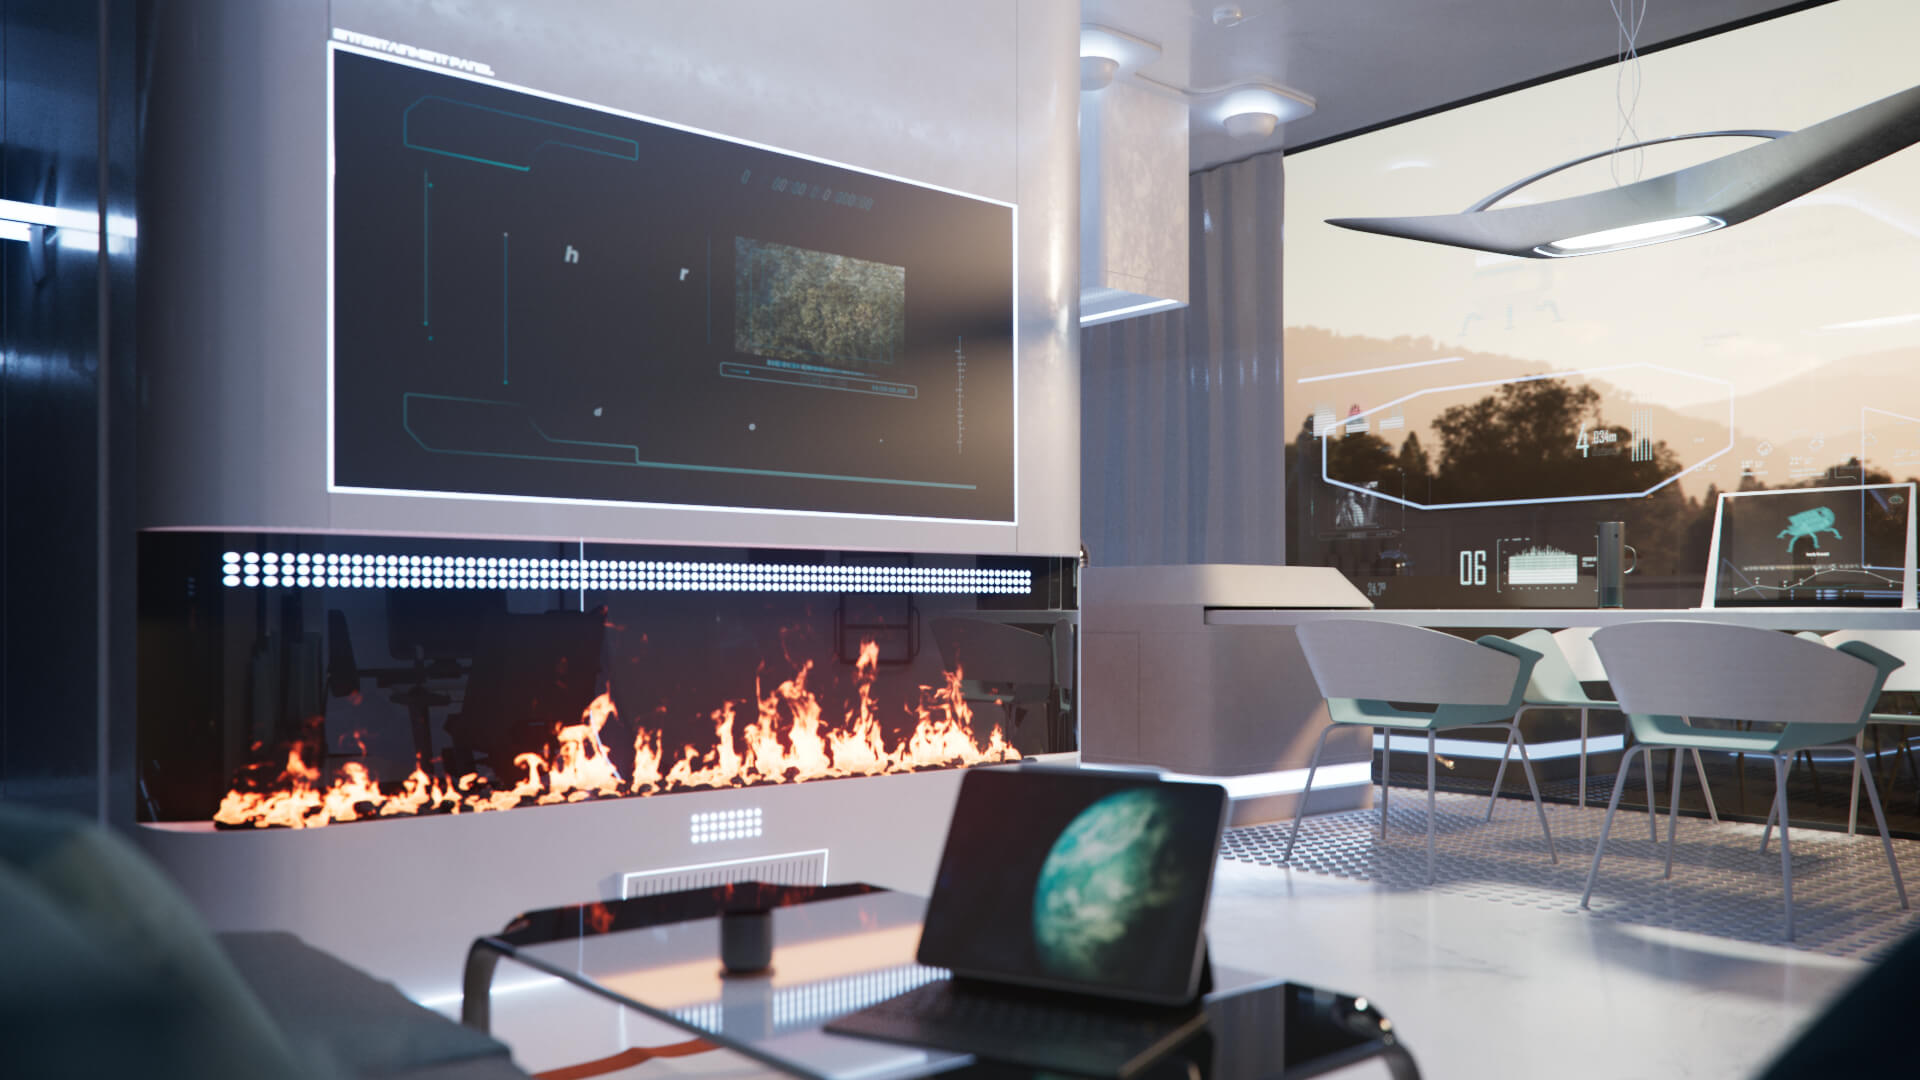 v-ray for 3ds max showing a futuristic room with screen, fire and desks